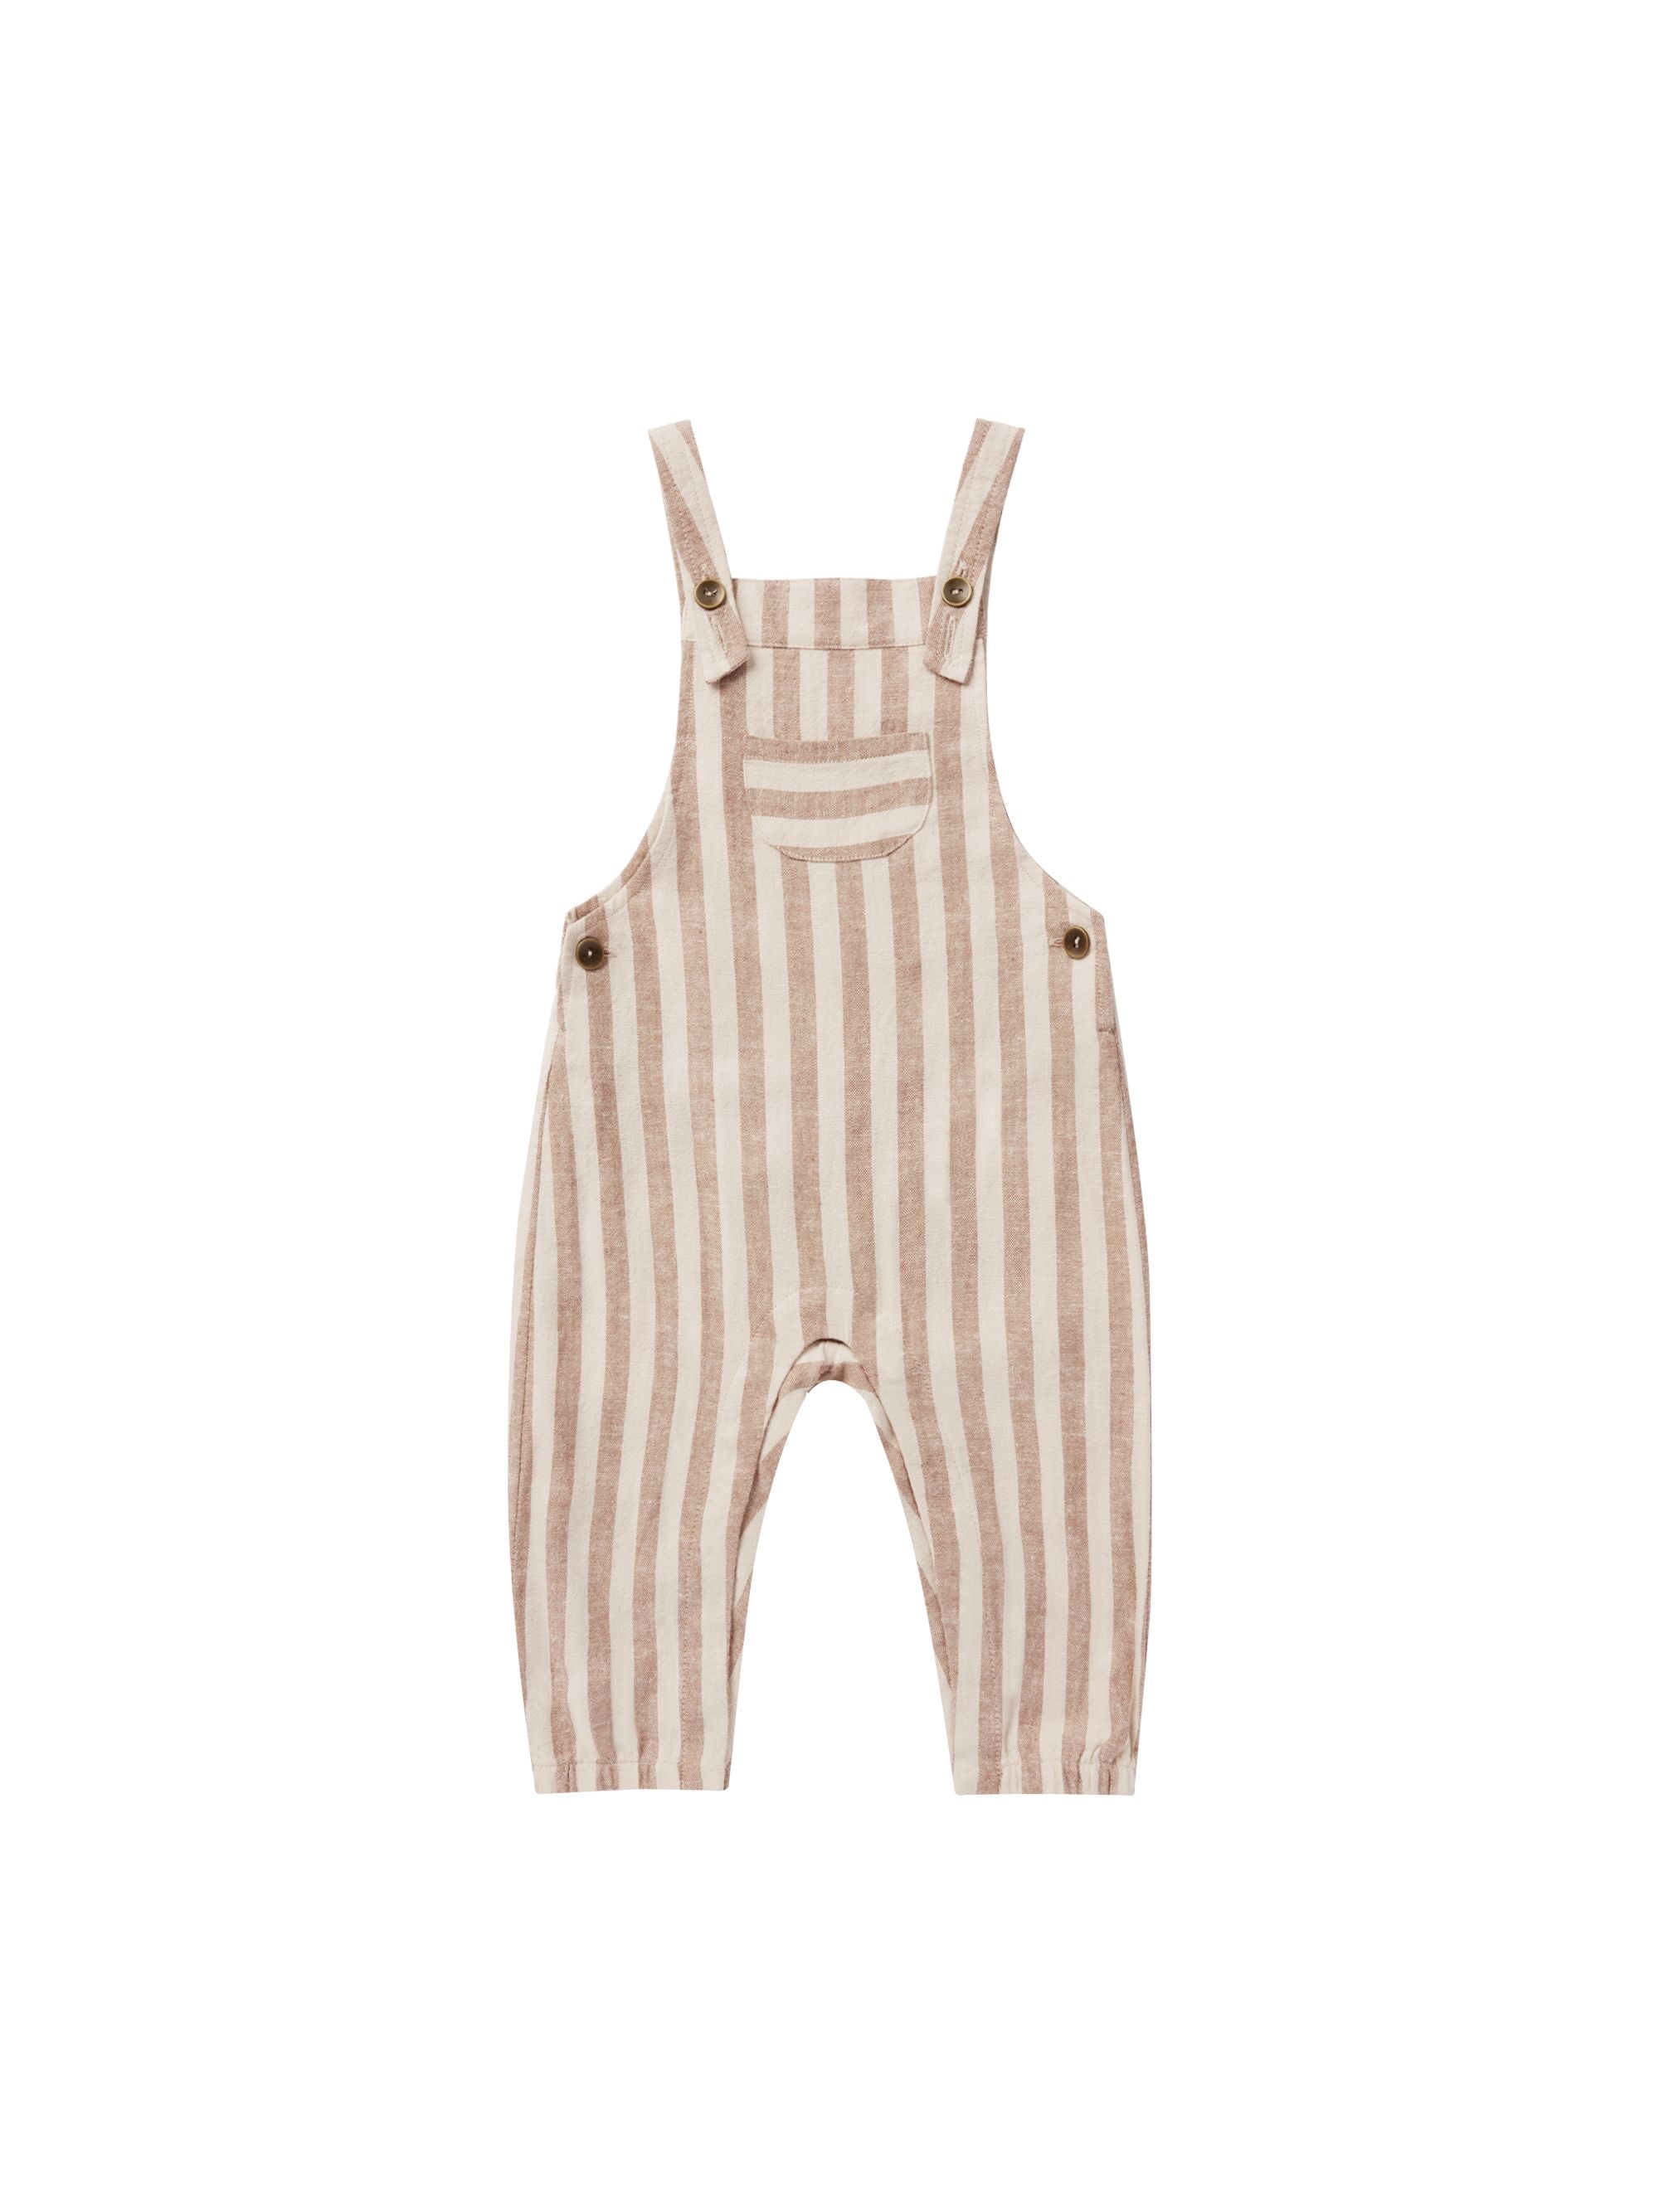 Baby Overall || Clay Stripe